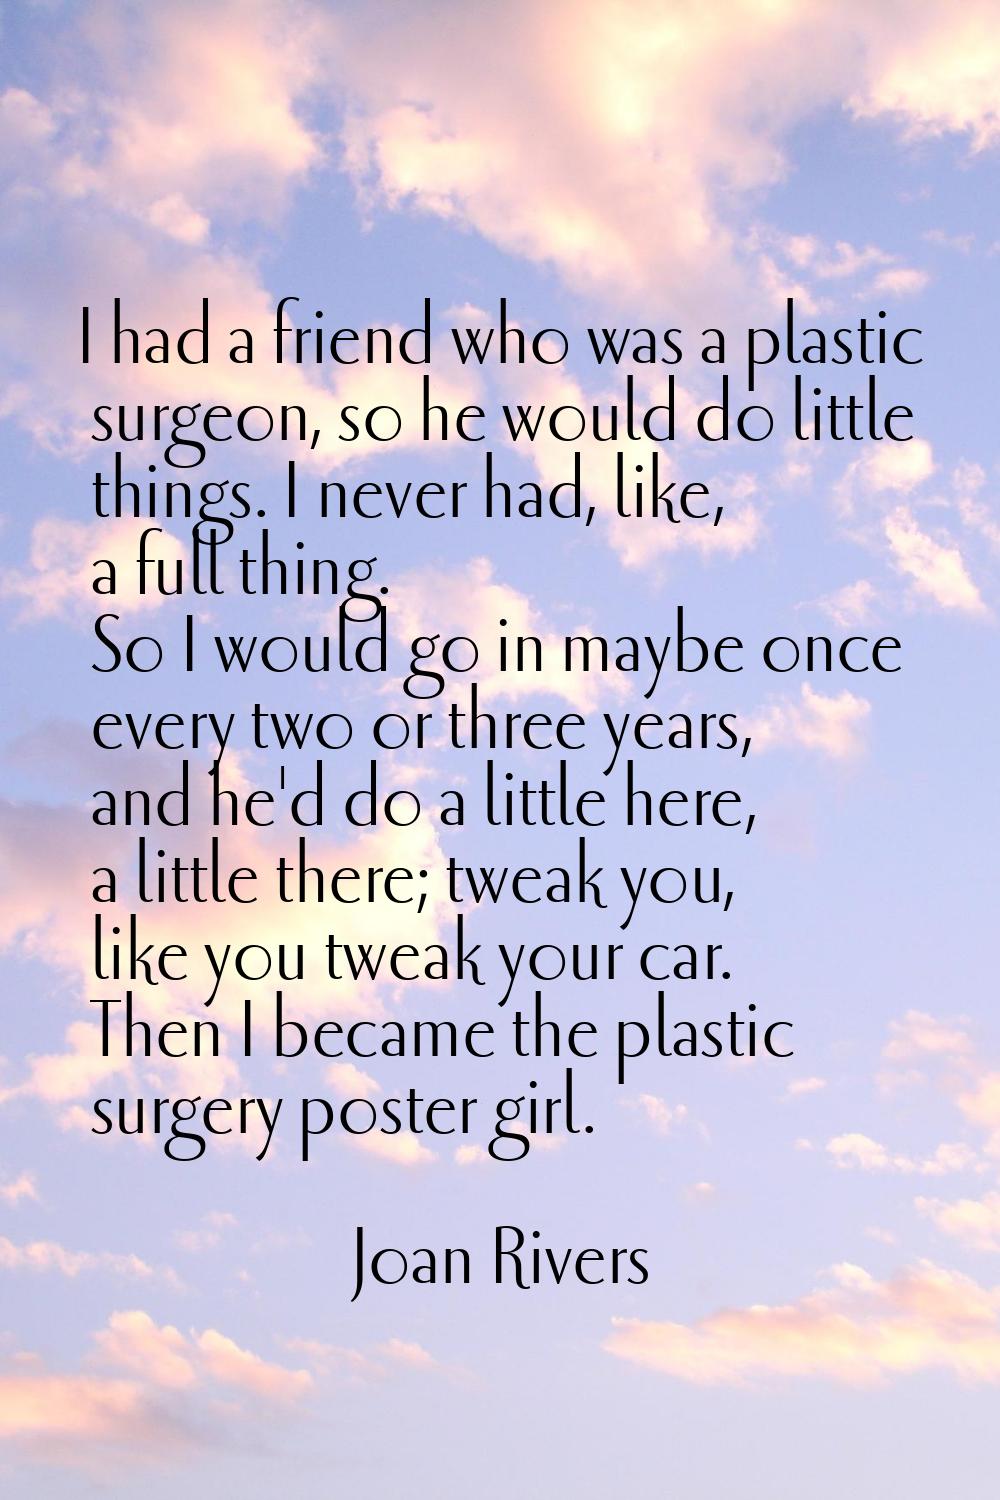 I had a friend who was a plastic surgeon, so he would do little things. I never had, like, a full t